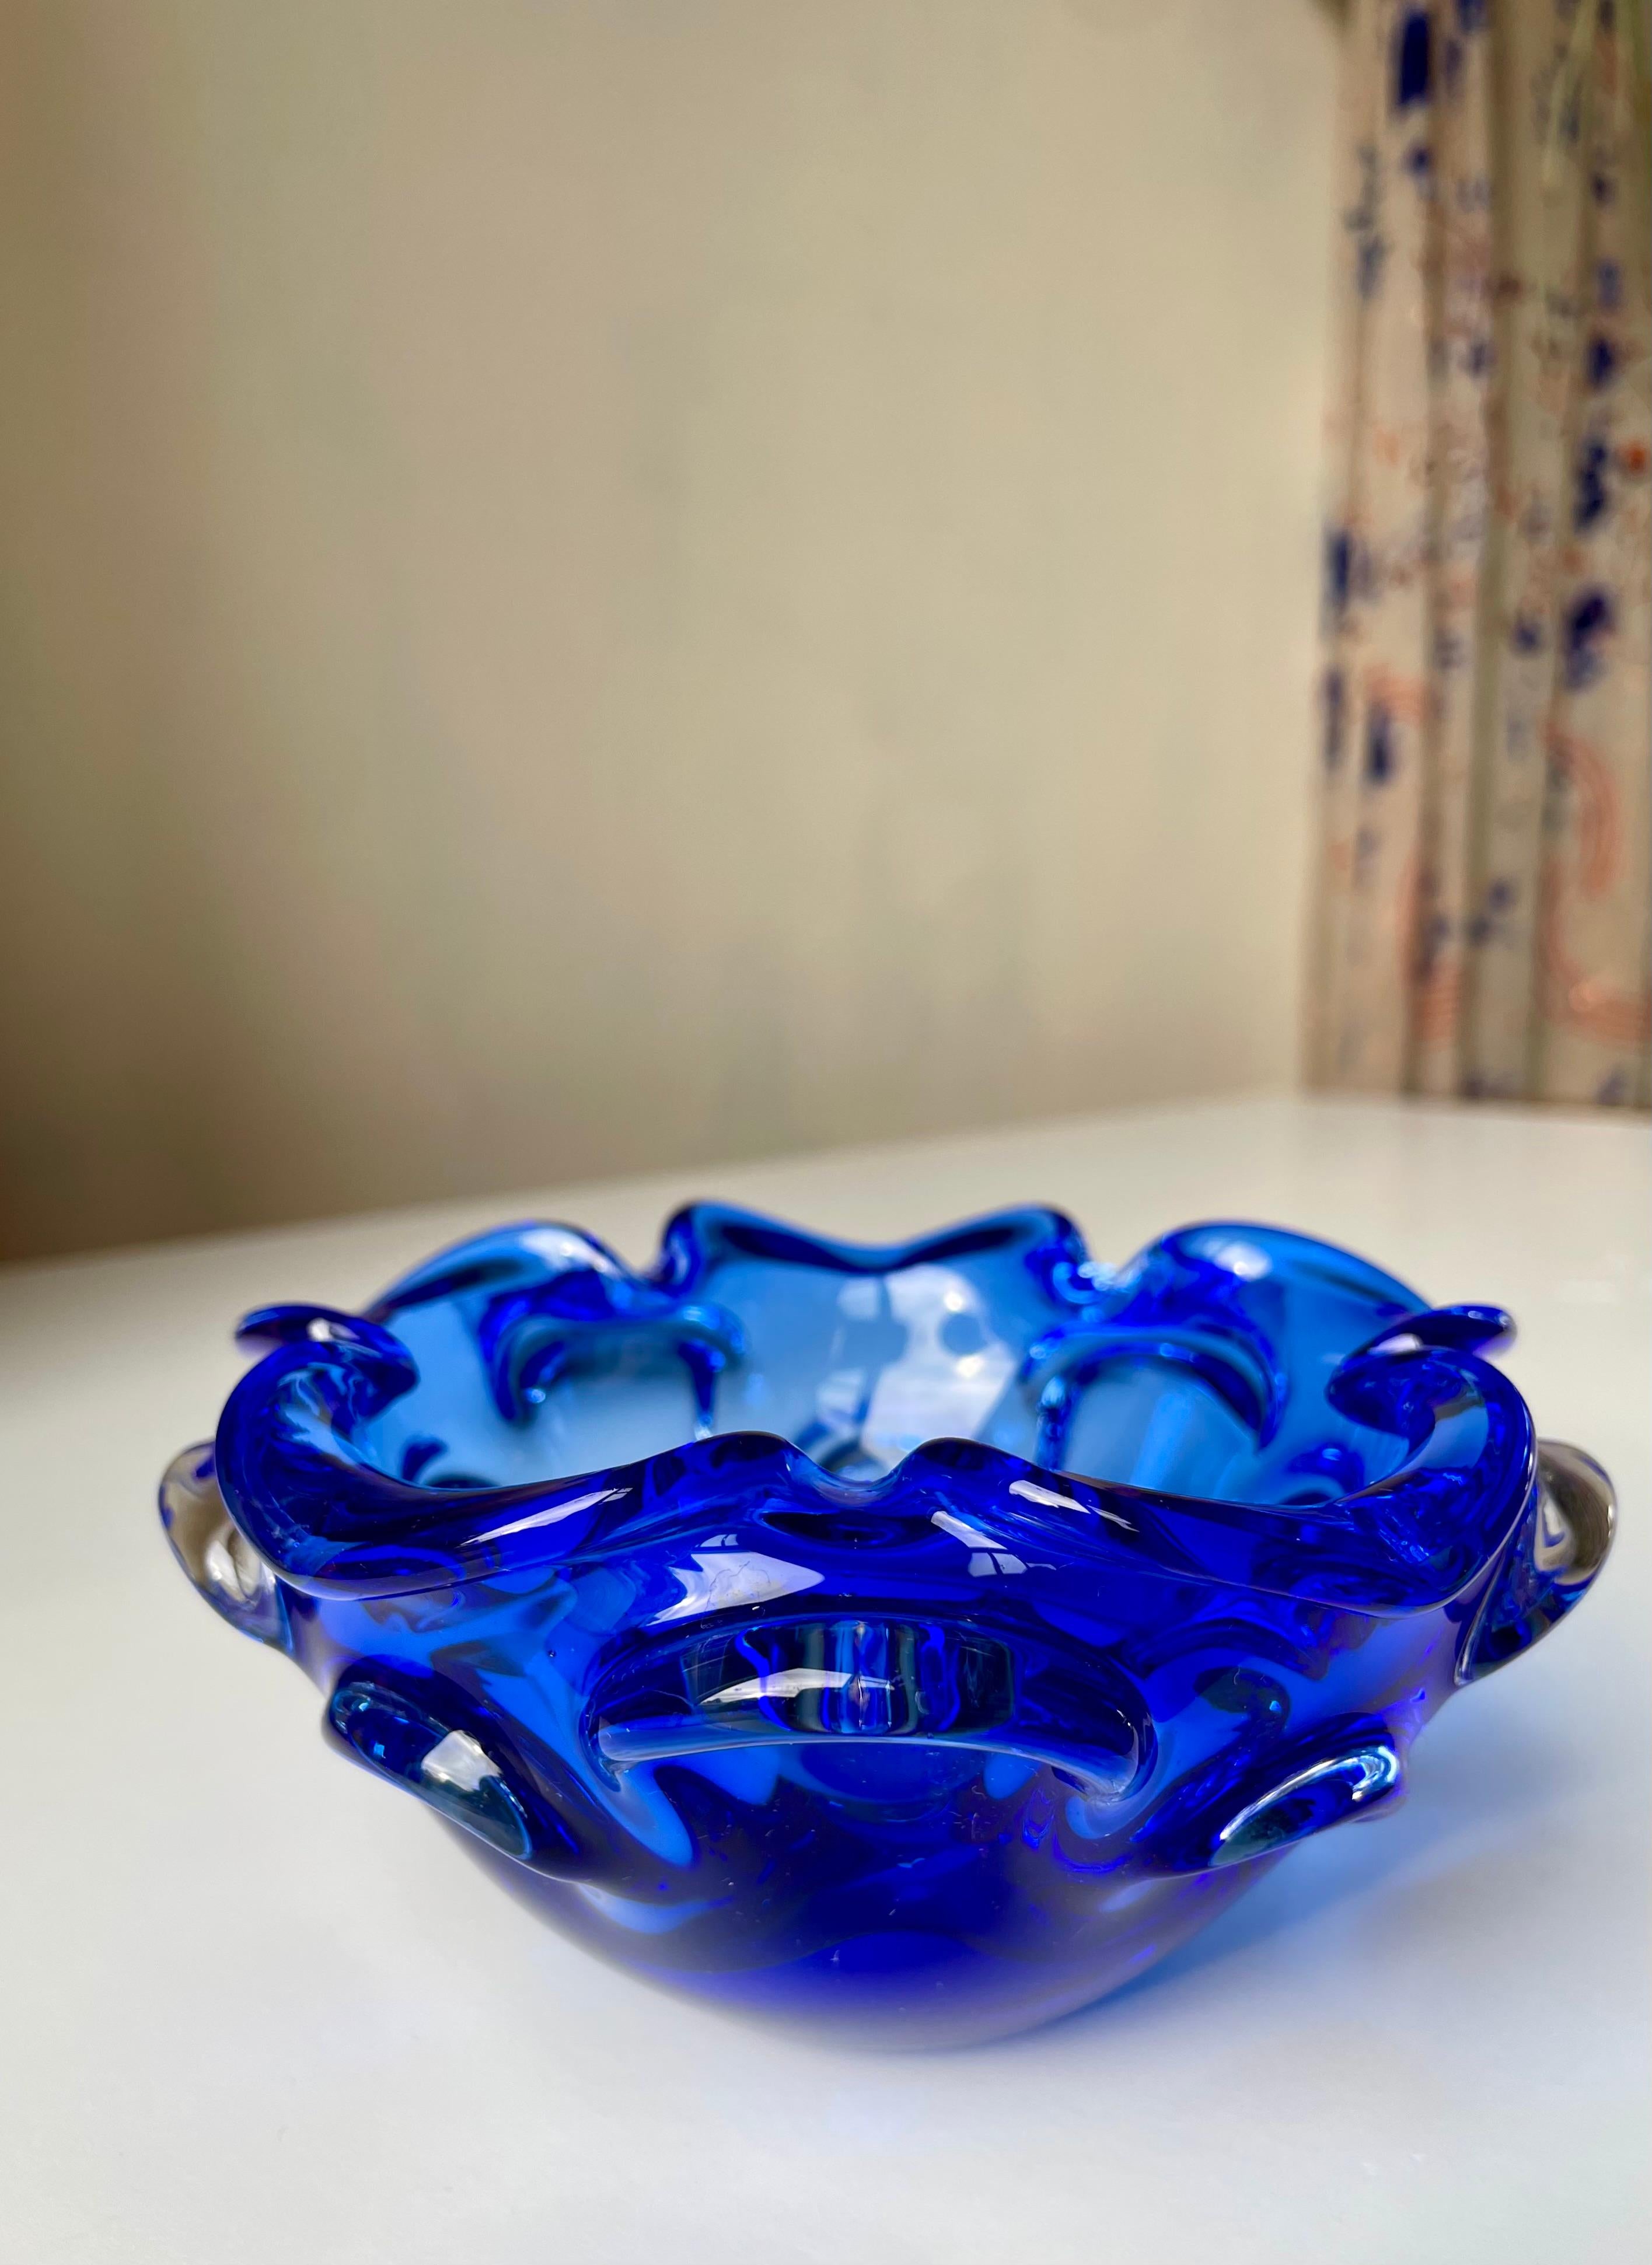 Mouth blown Swedish modern encased vivid blue art glass bowl in Murano Sommerso style. Round shape with large frills around the edge and multiple symmetrical waves decorating the exterior of the bowl. A heavy, solid decorative glass piece in